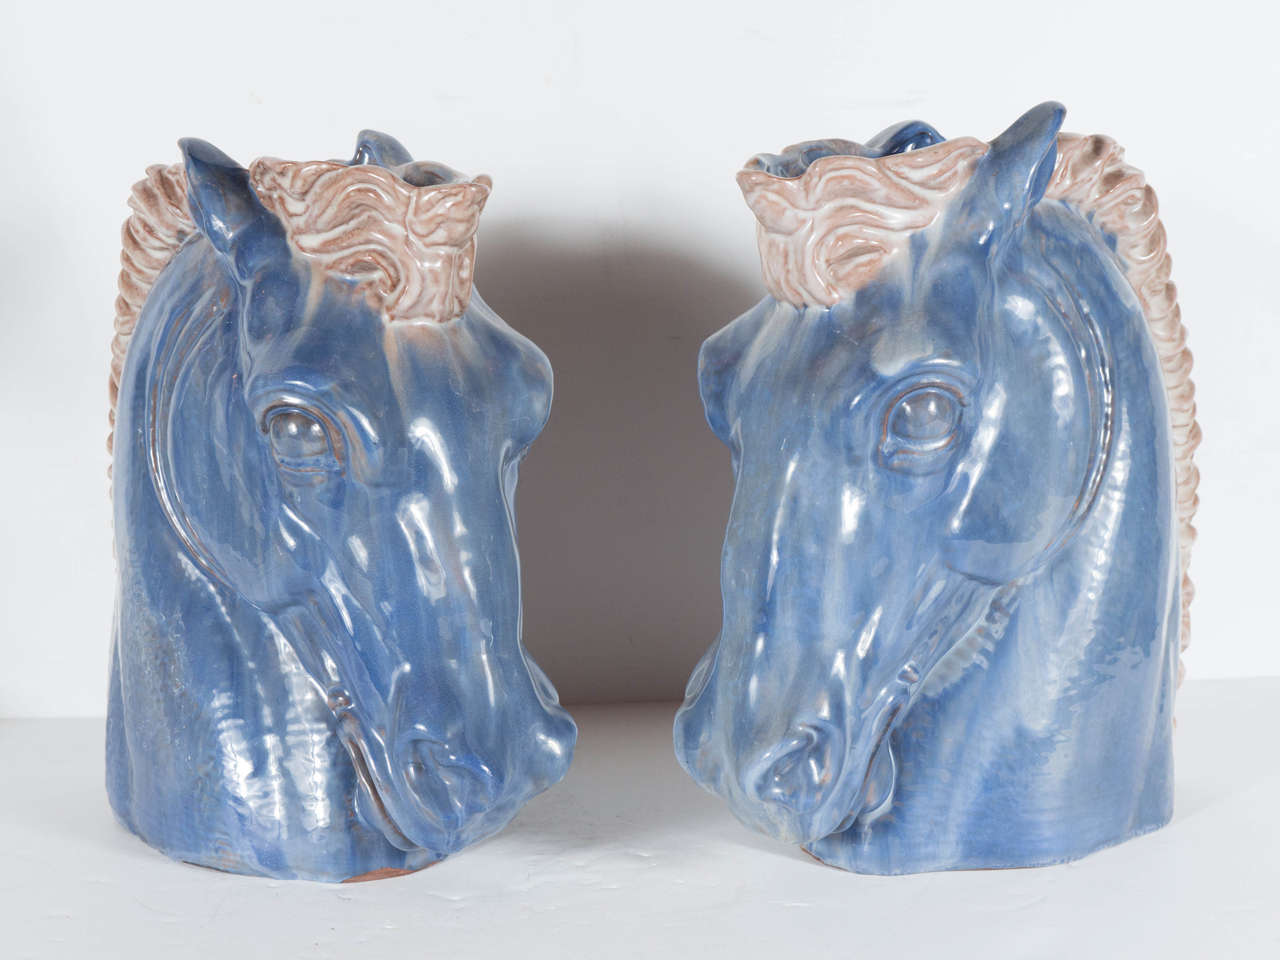 This gorgeous pair of 1940s hand-painted ceramic horse head vases by Stangl are exceptional. There craftsmanship is exquisite featuring a wonderful hue of sea blue with cream detailing. They have been hand-painted and feature a great stylized form